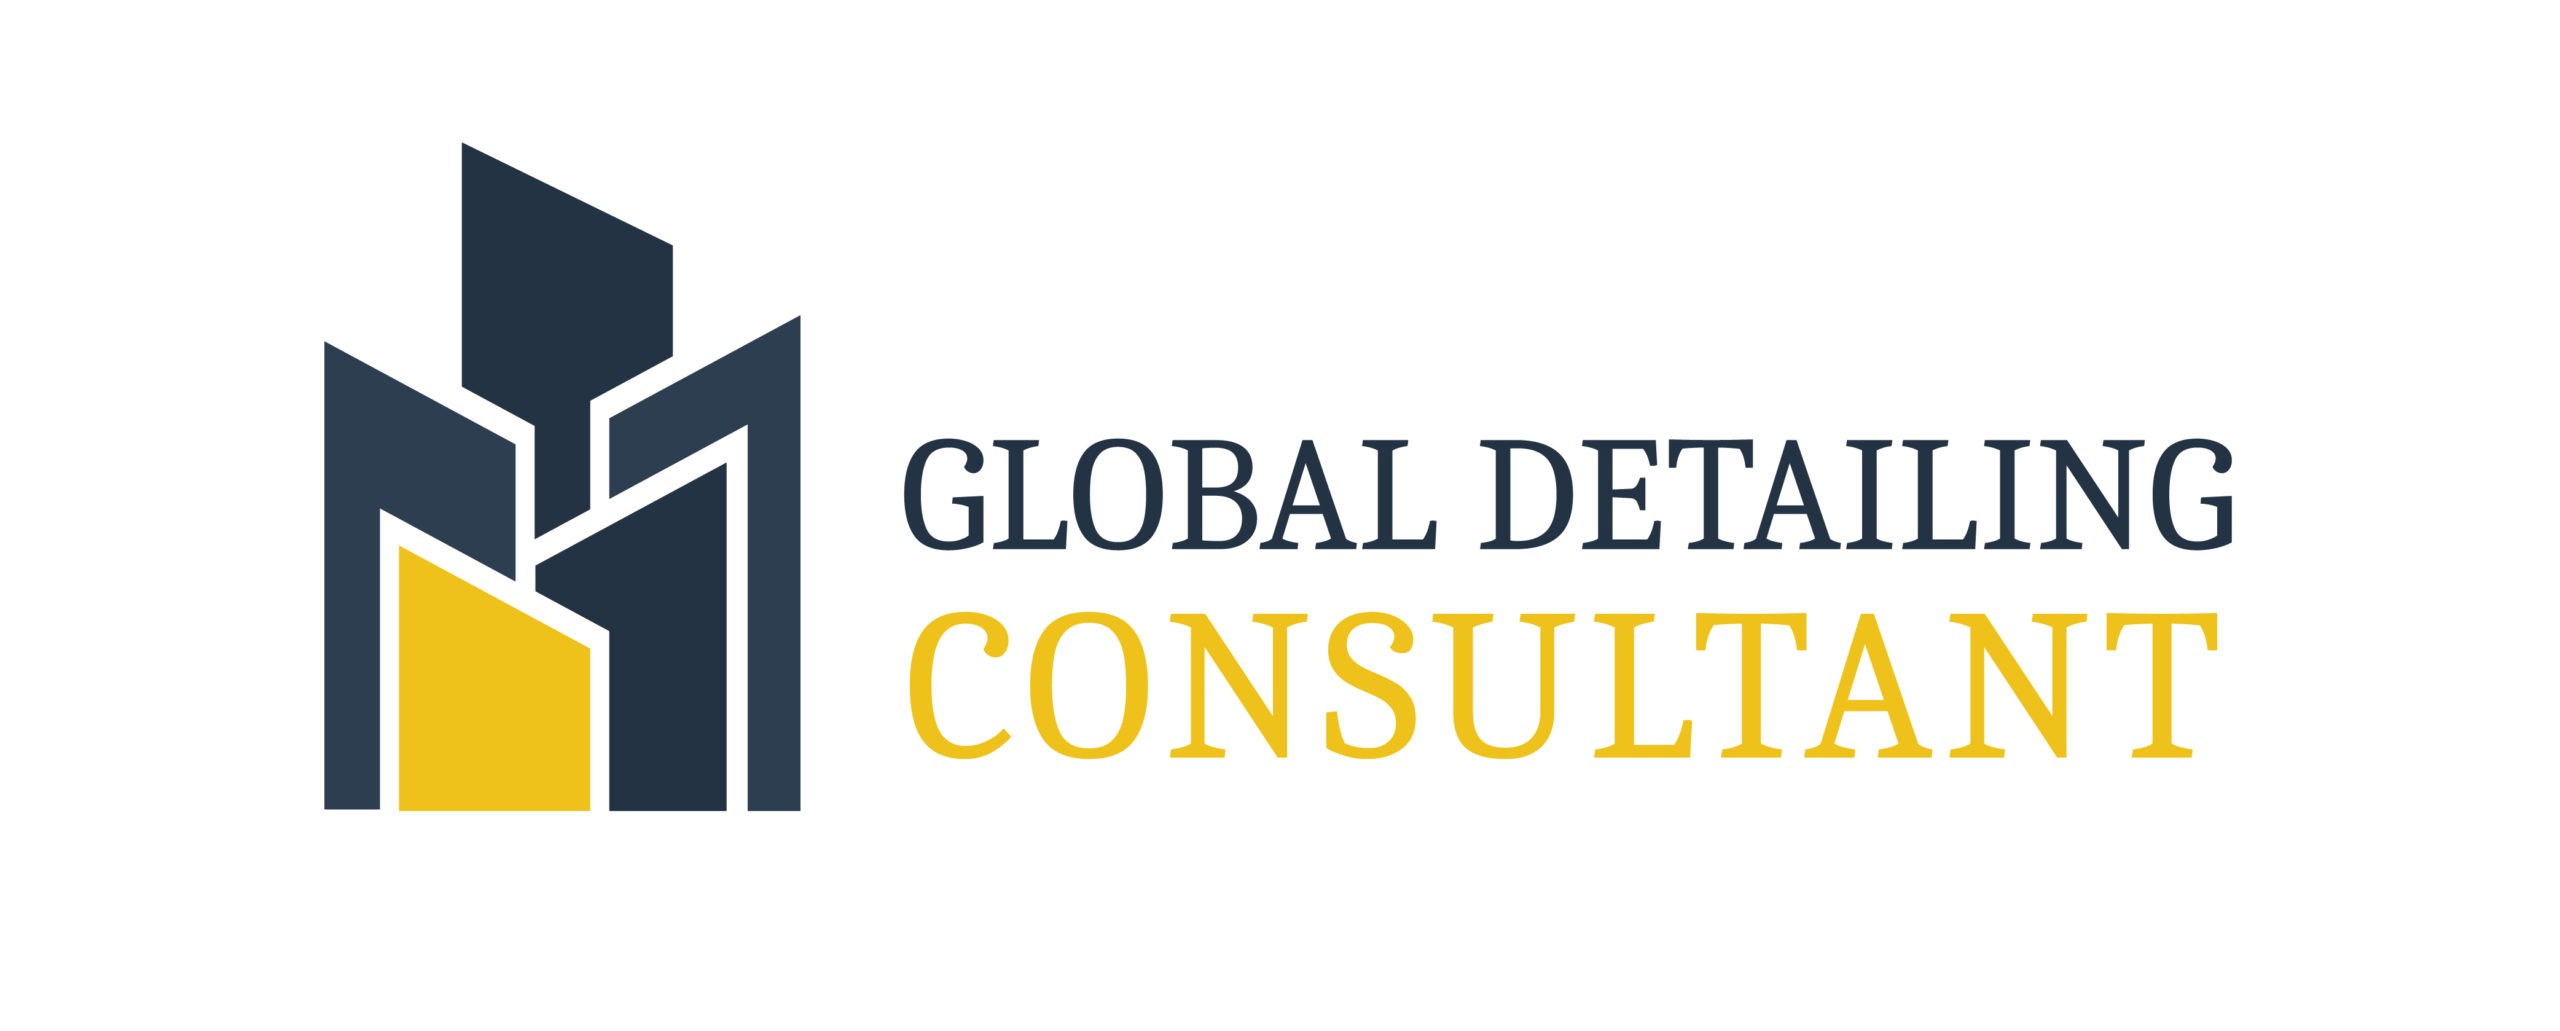 Global Detailing Consultant-Steel Detailing and Drafting Company